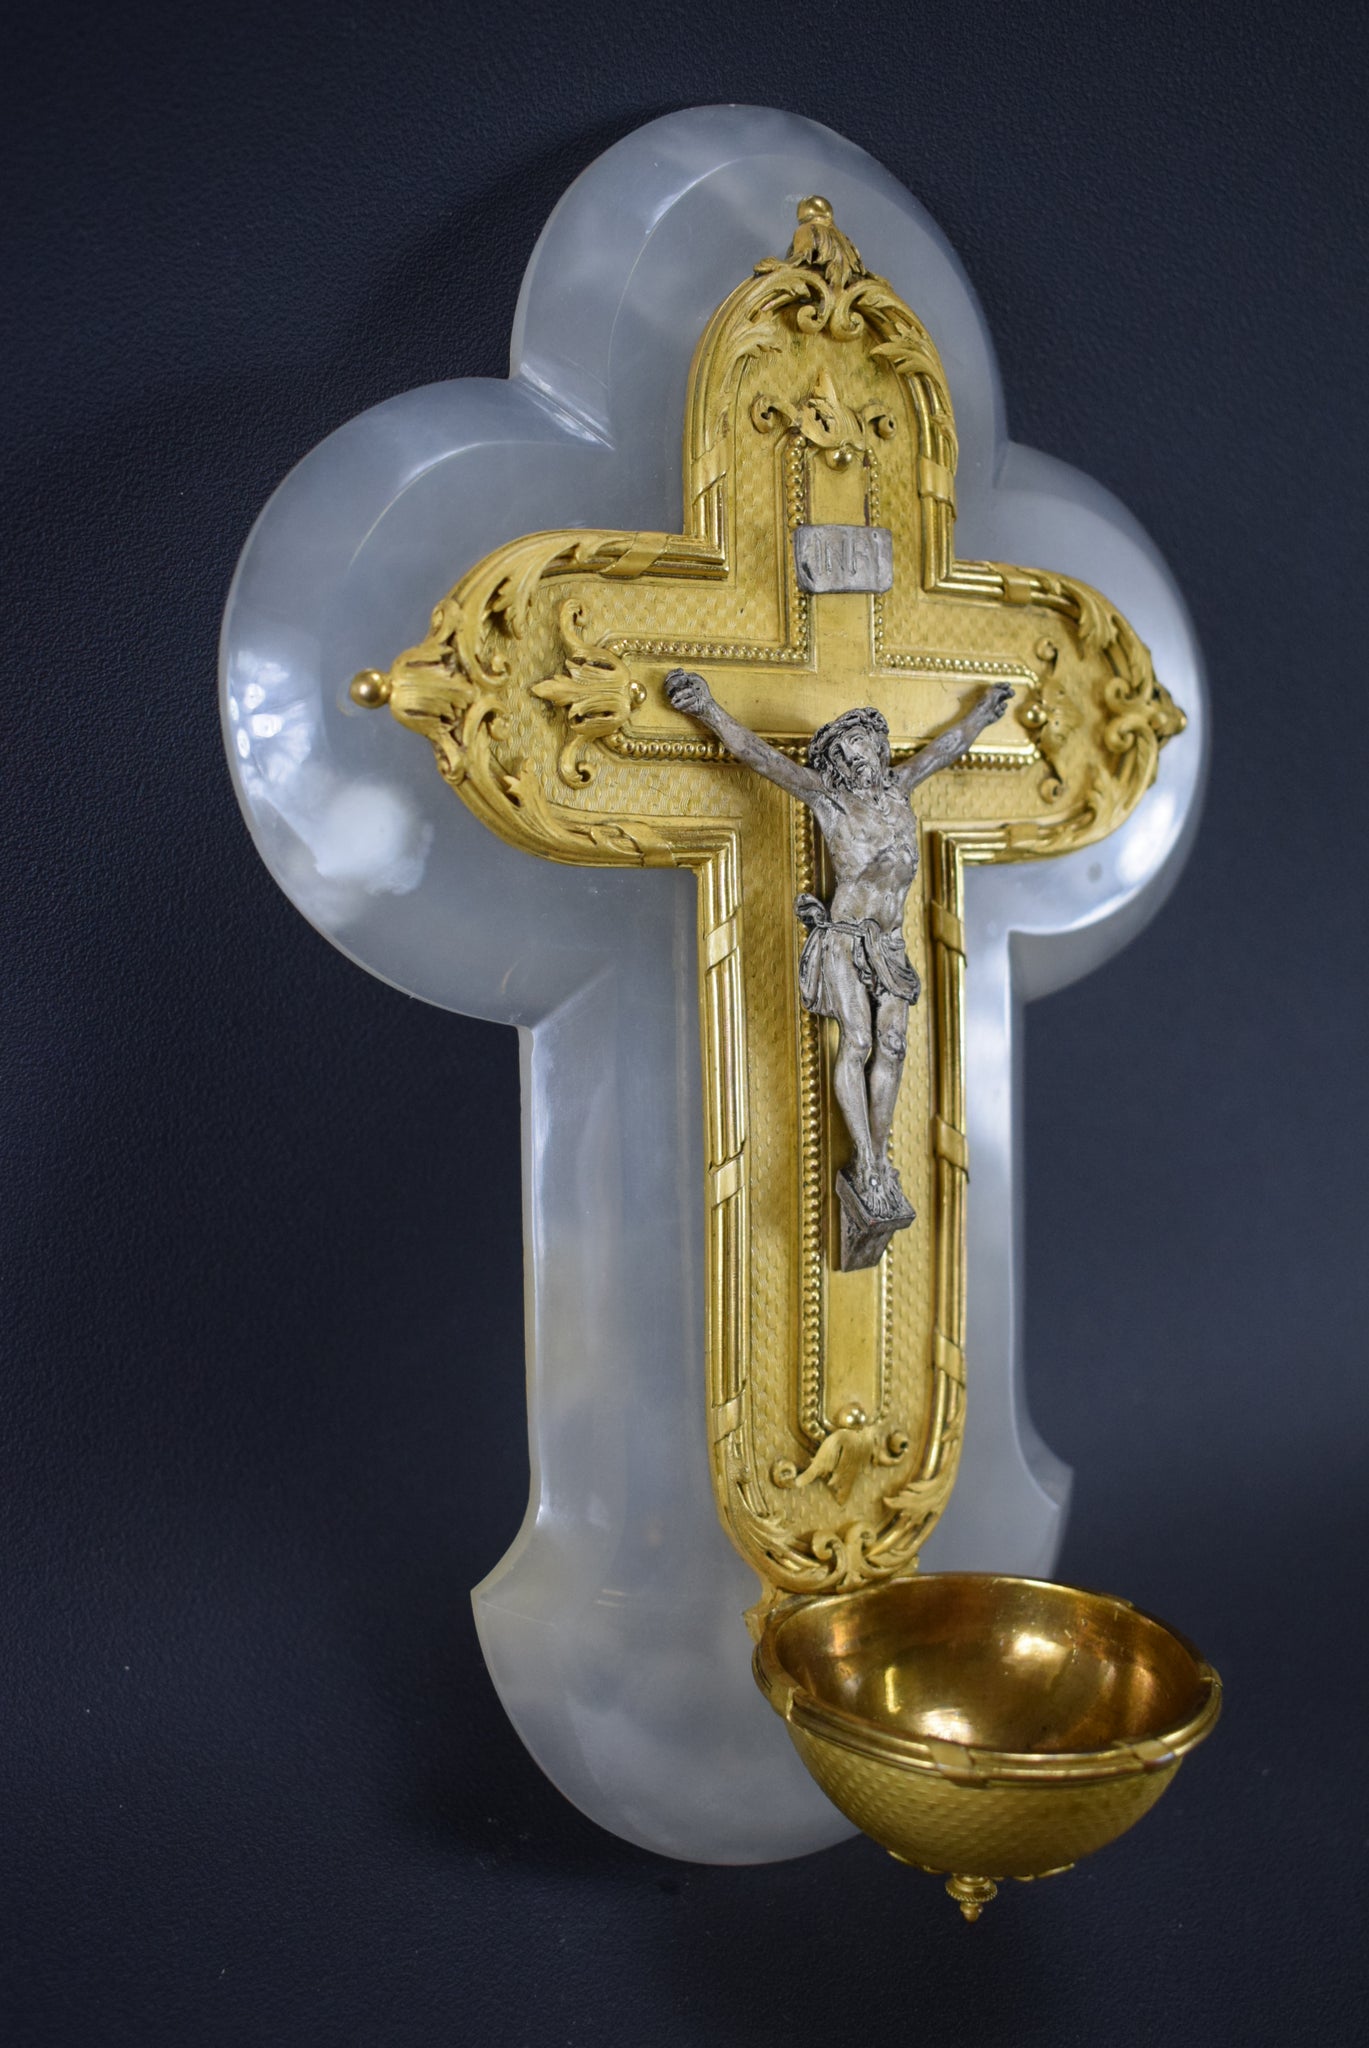 Gold and White Holy Water Font - Charmantiques